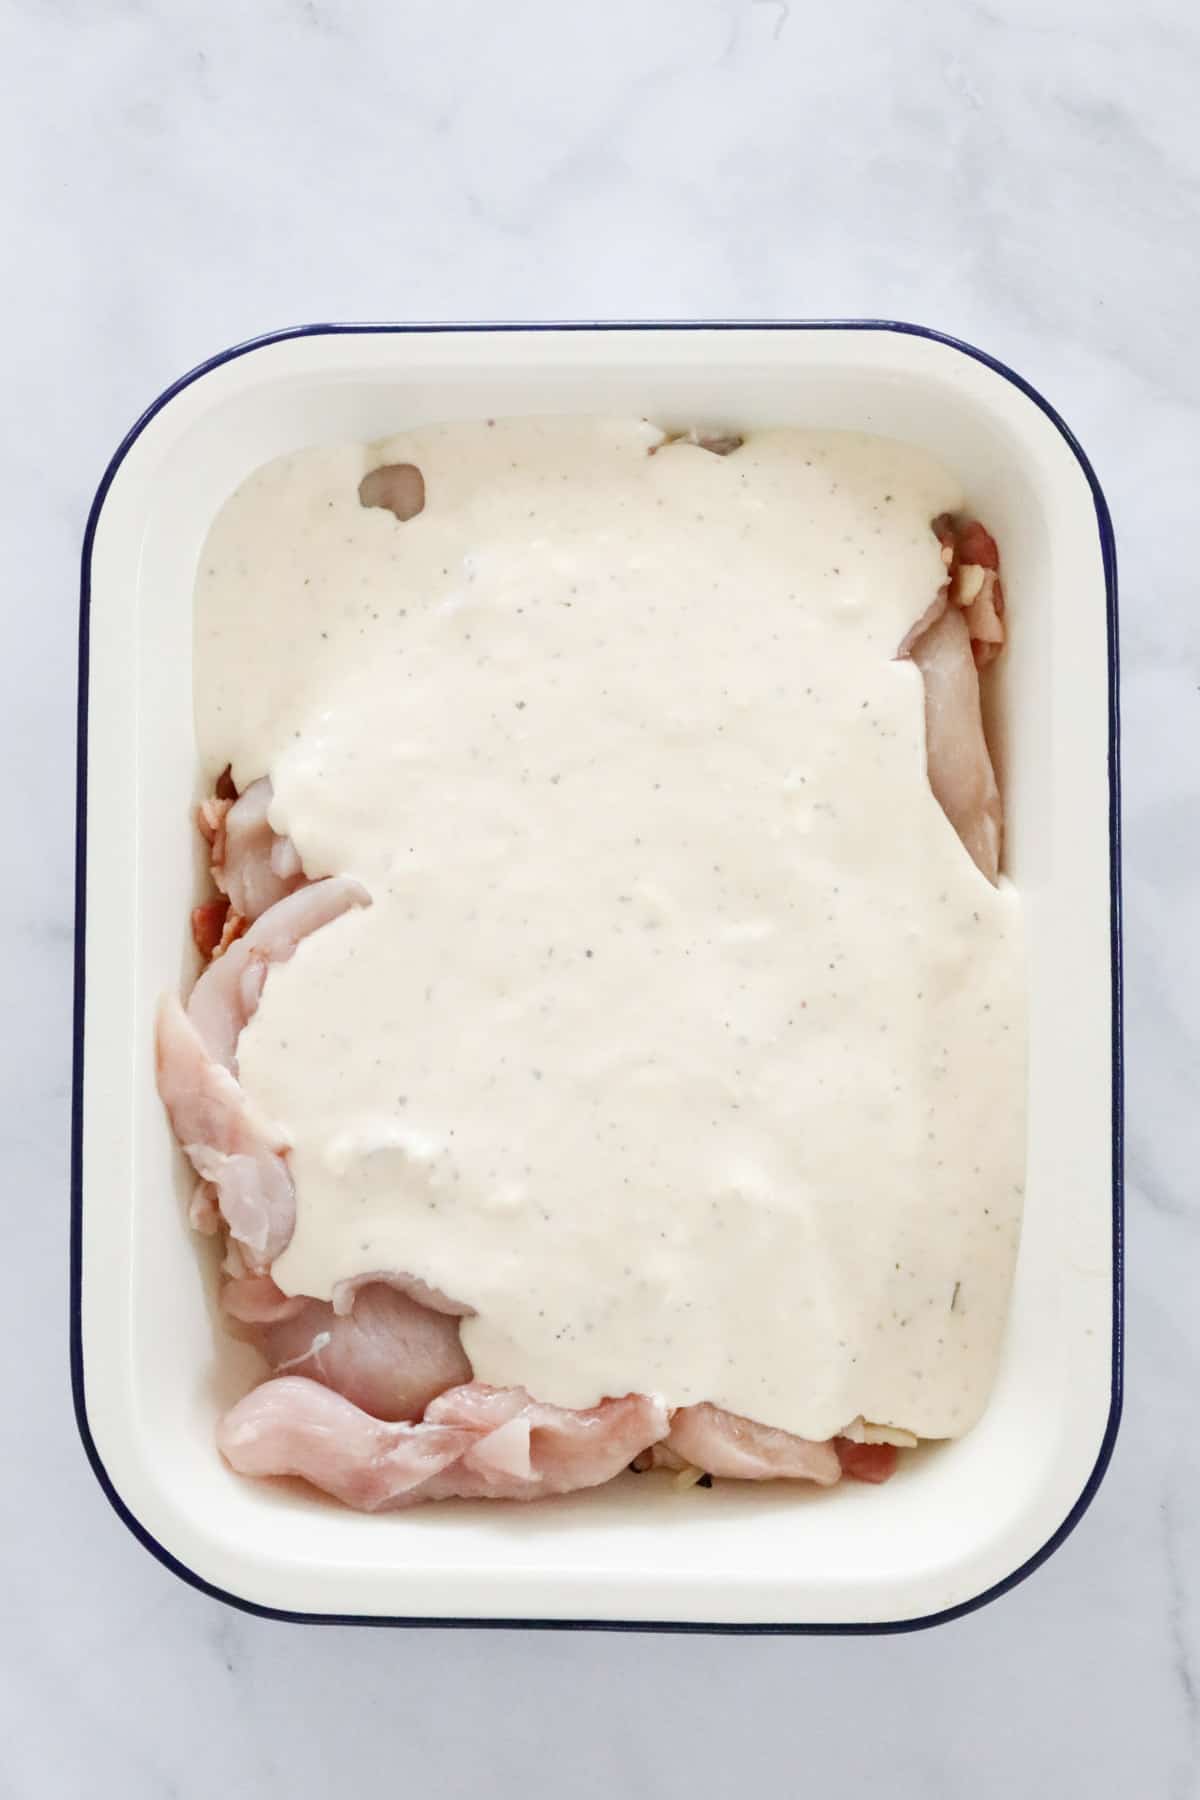 Creamy ranch sour cream sauce poured over chicken pieces in a baking dish.